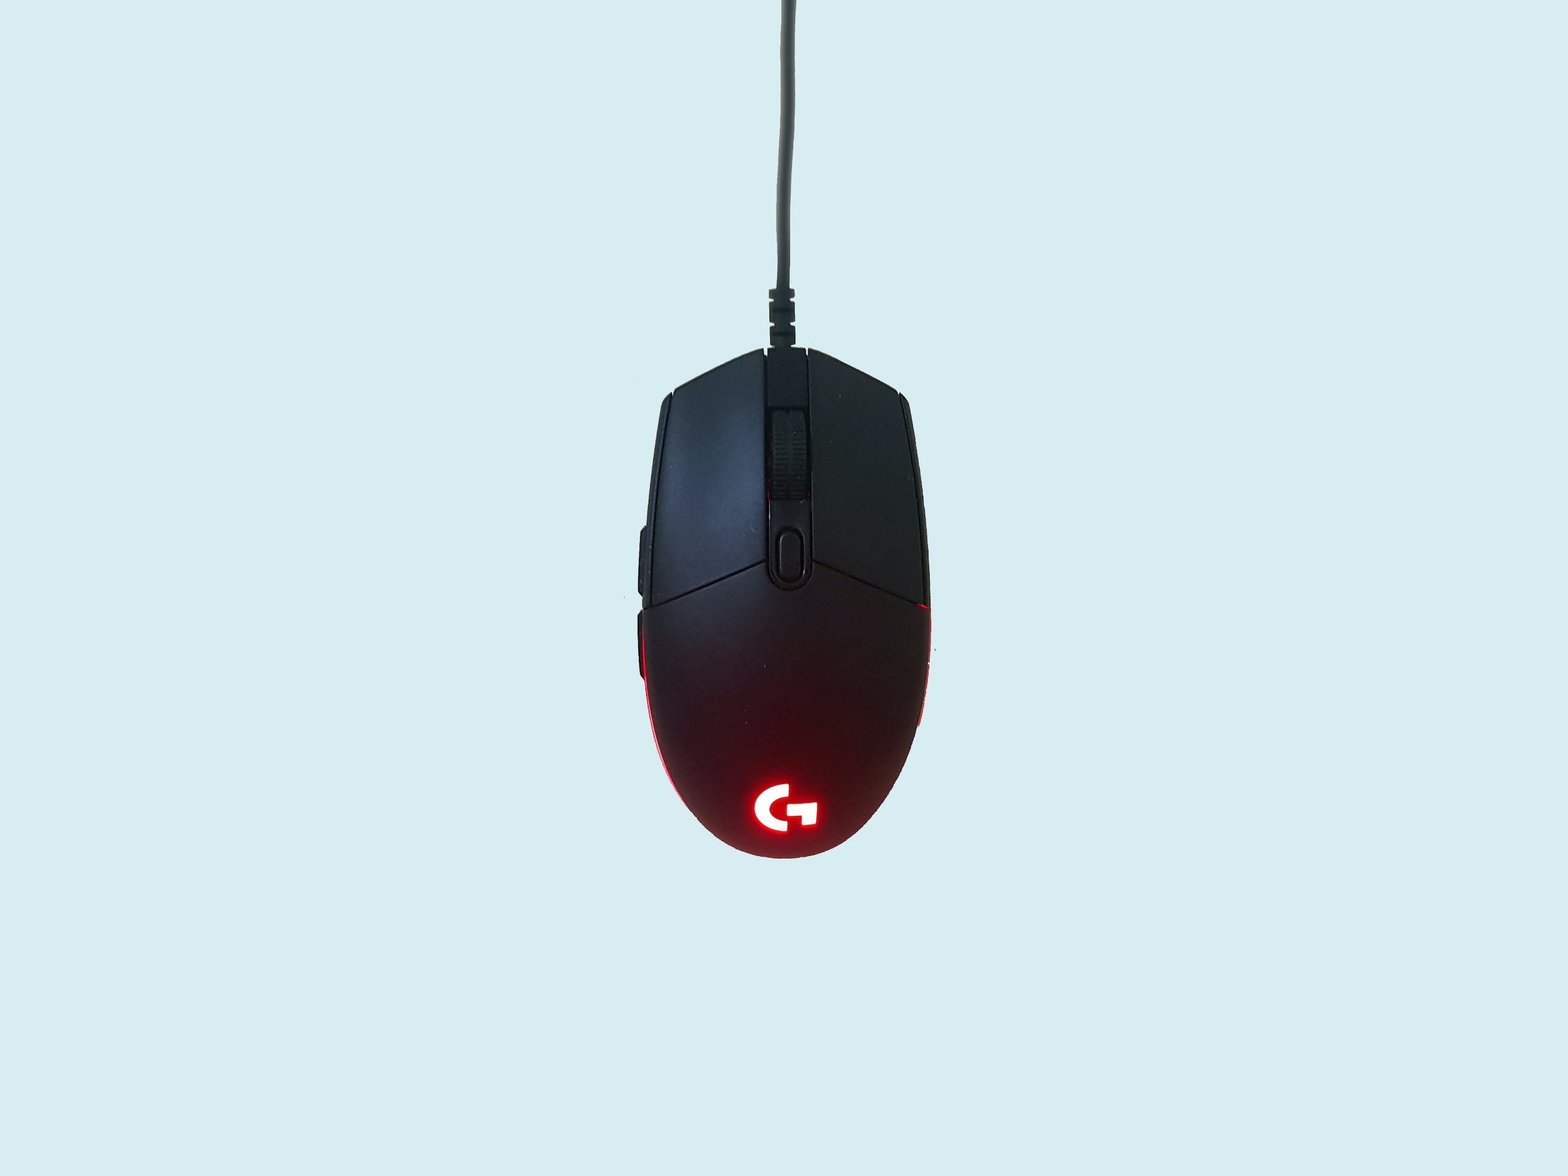 The Ultimate Mouse Troubleshooting Guide